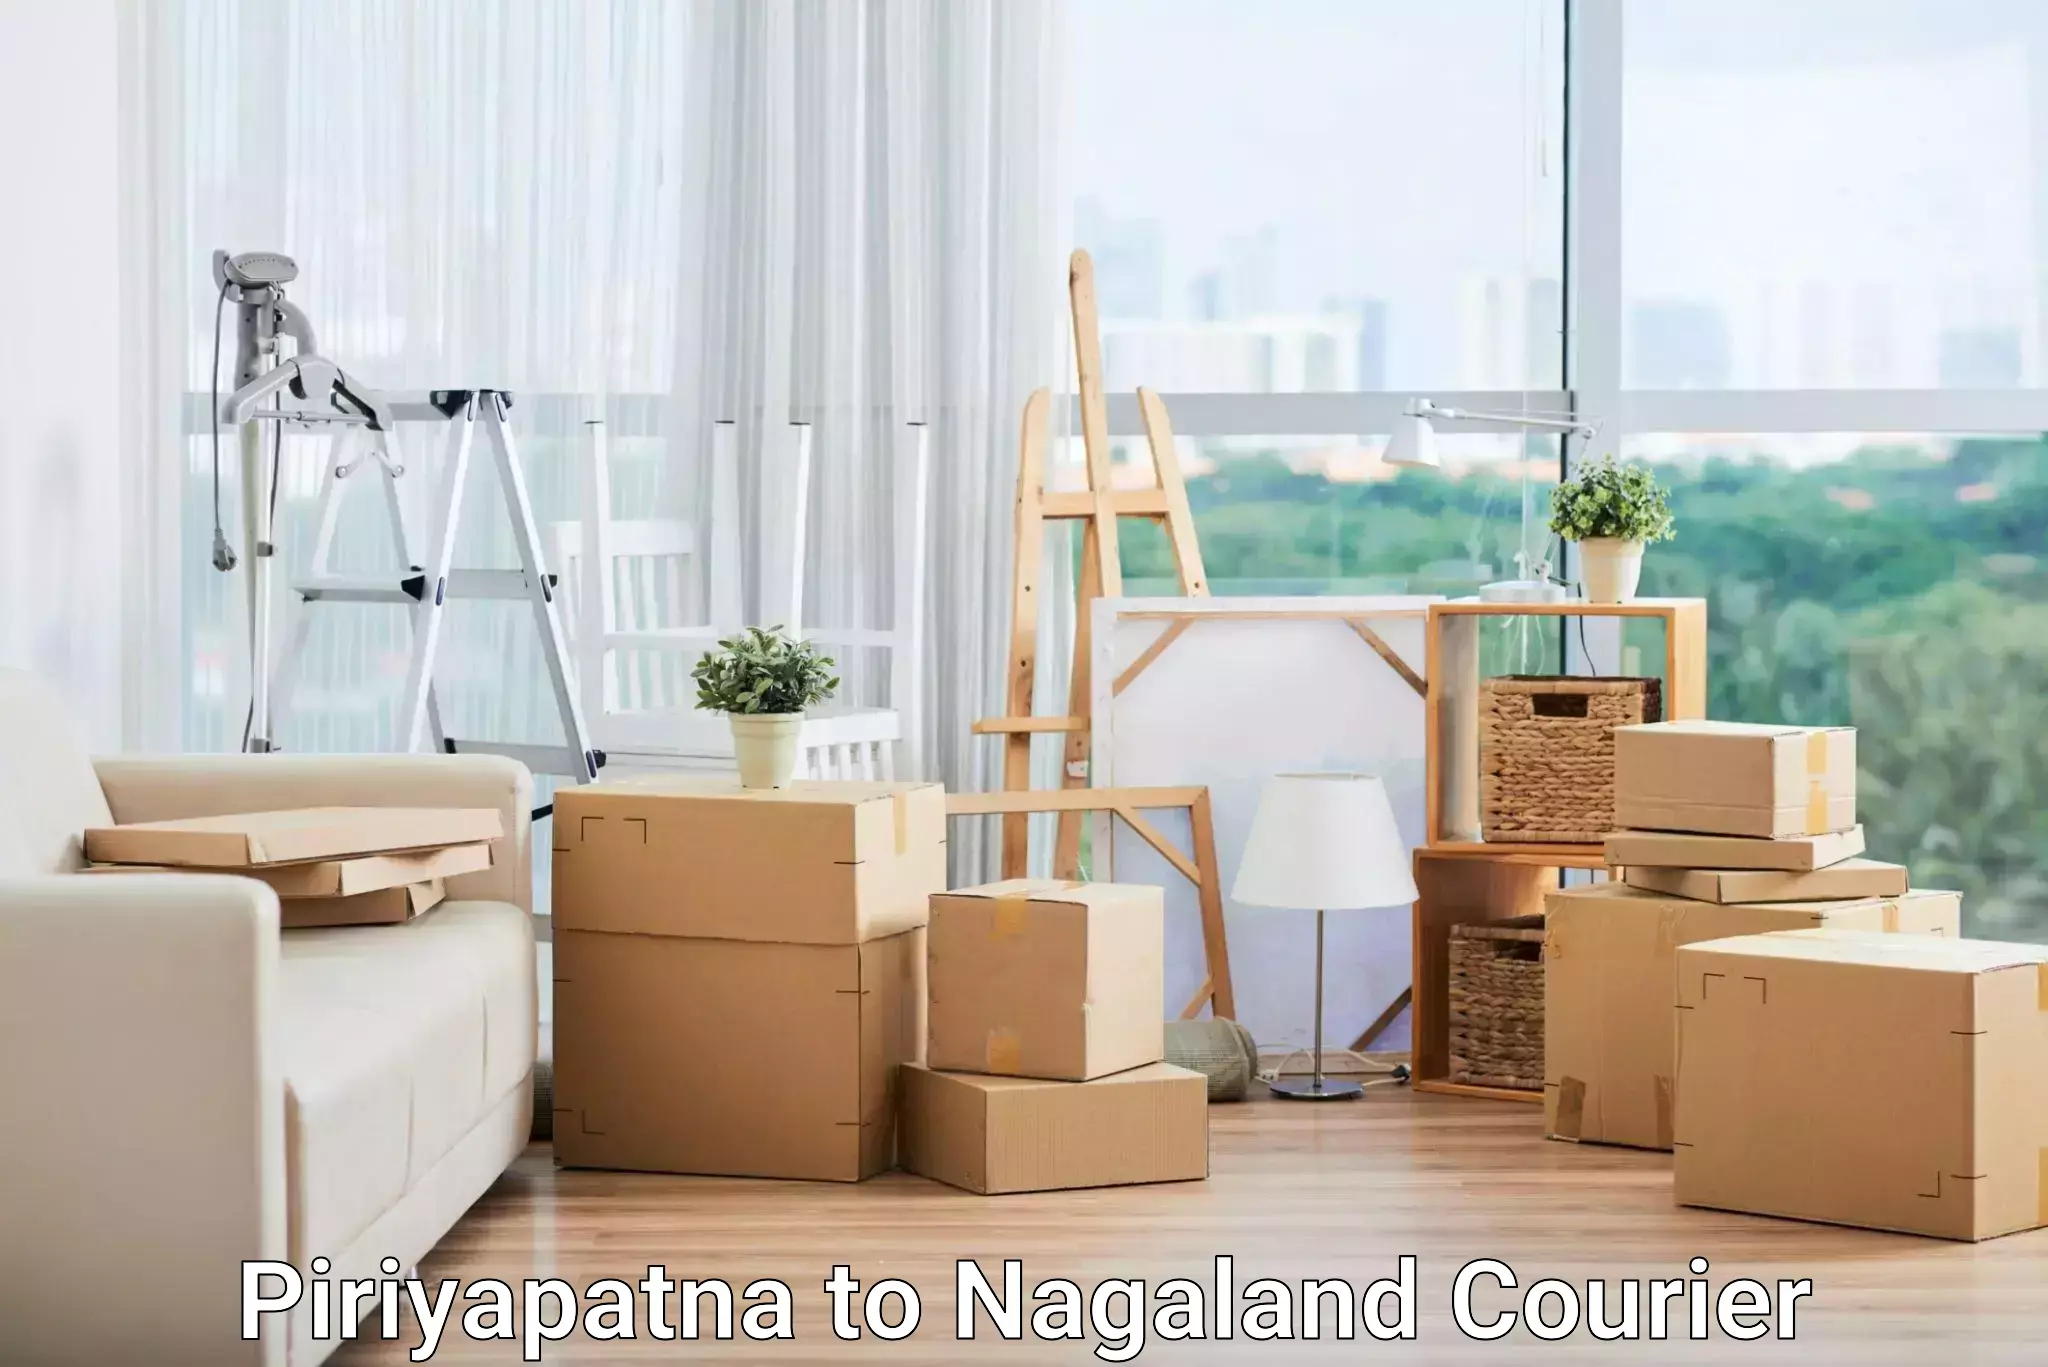 Cost-effective courier solutions Piriyapatna to Dimapur